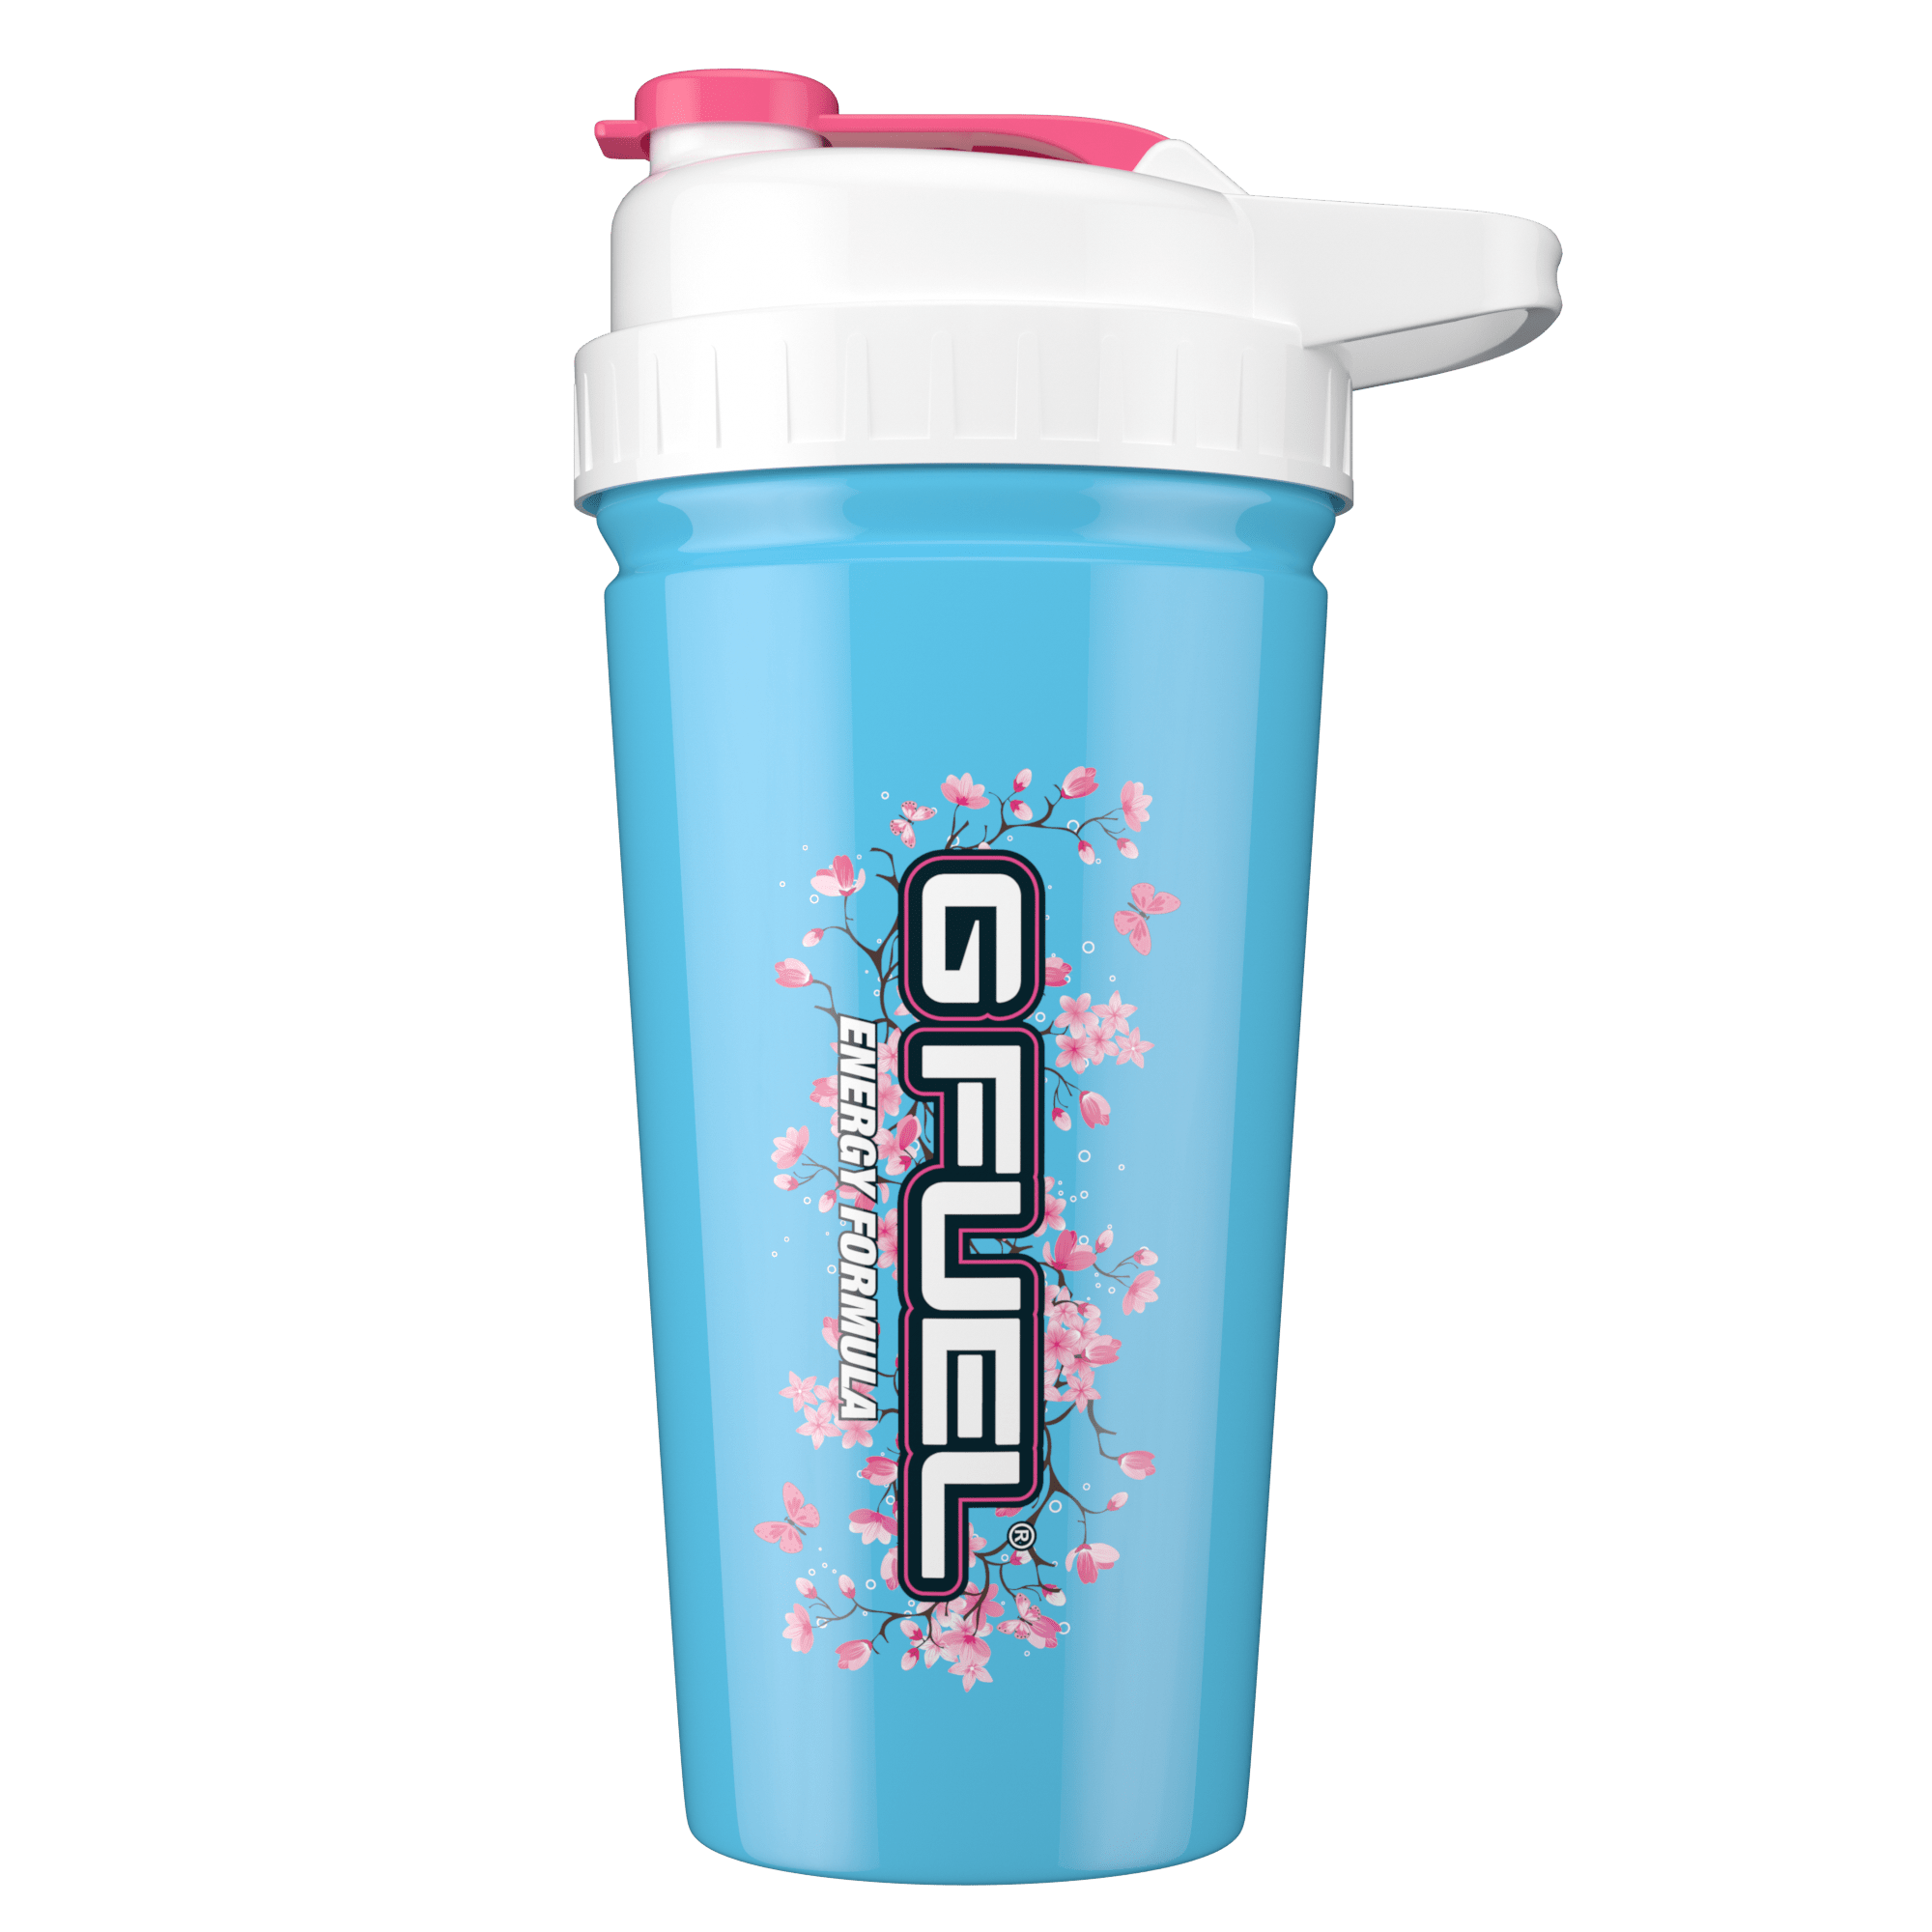 G Fuel Shaker Cups, Choose Your Own, 473ml Or 710ml, UK, GFUEL Energy